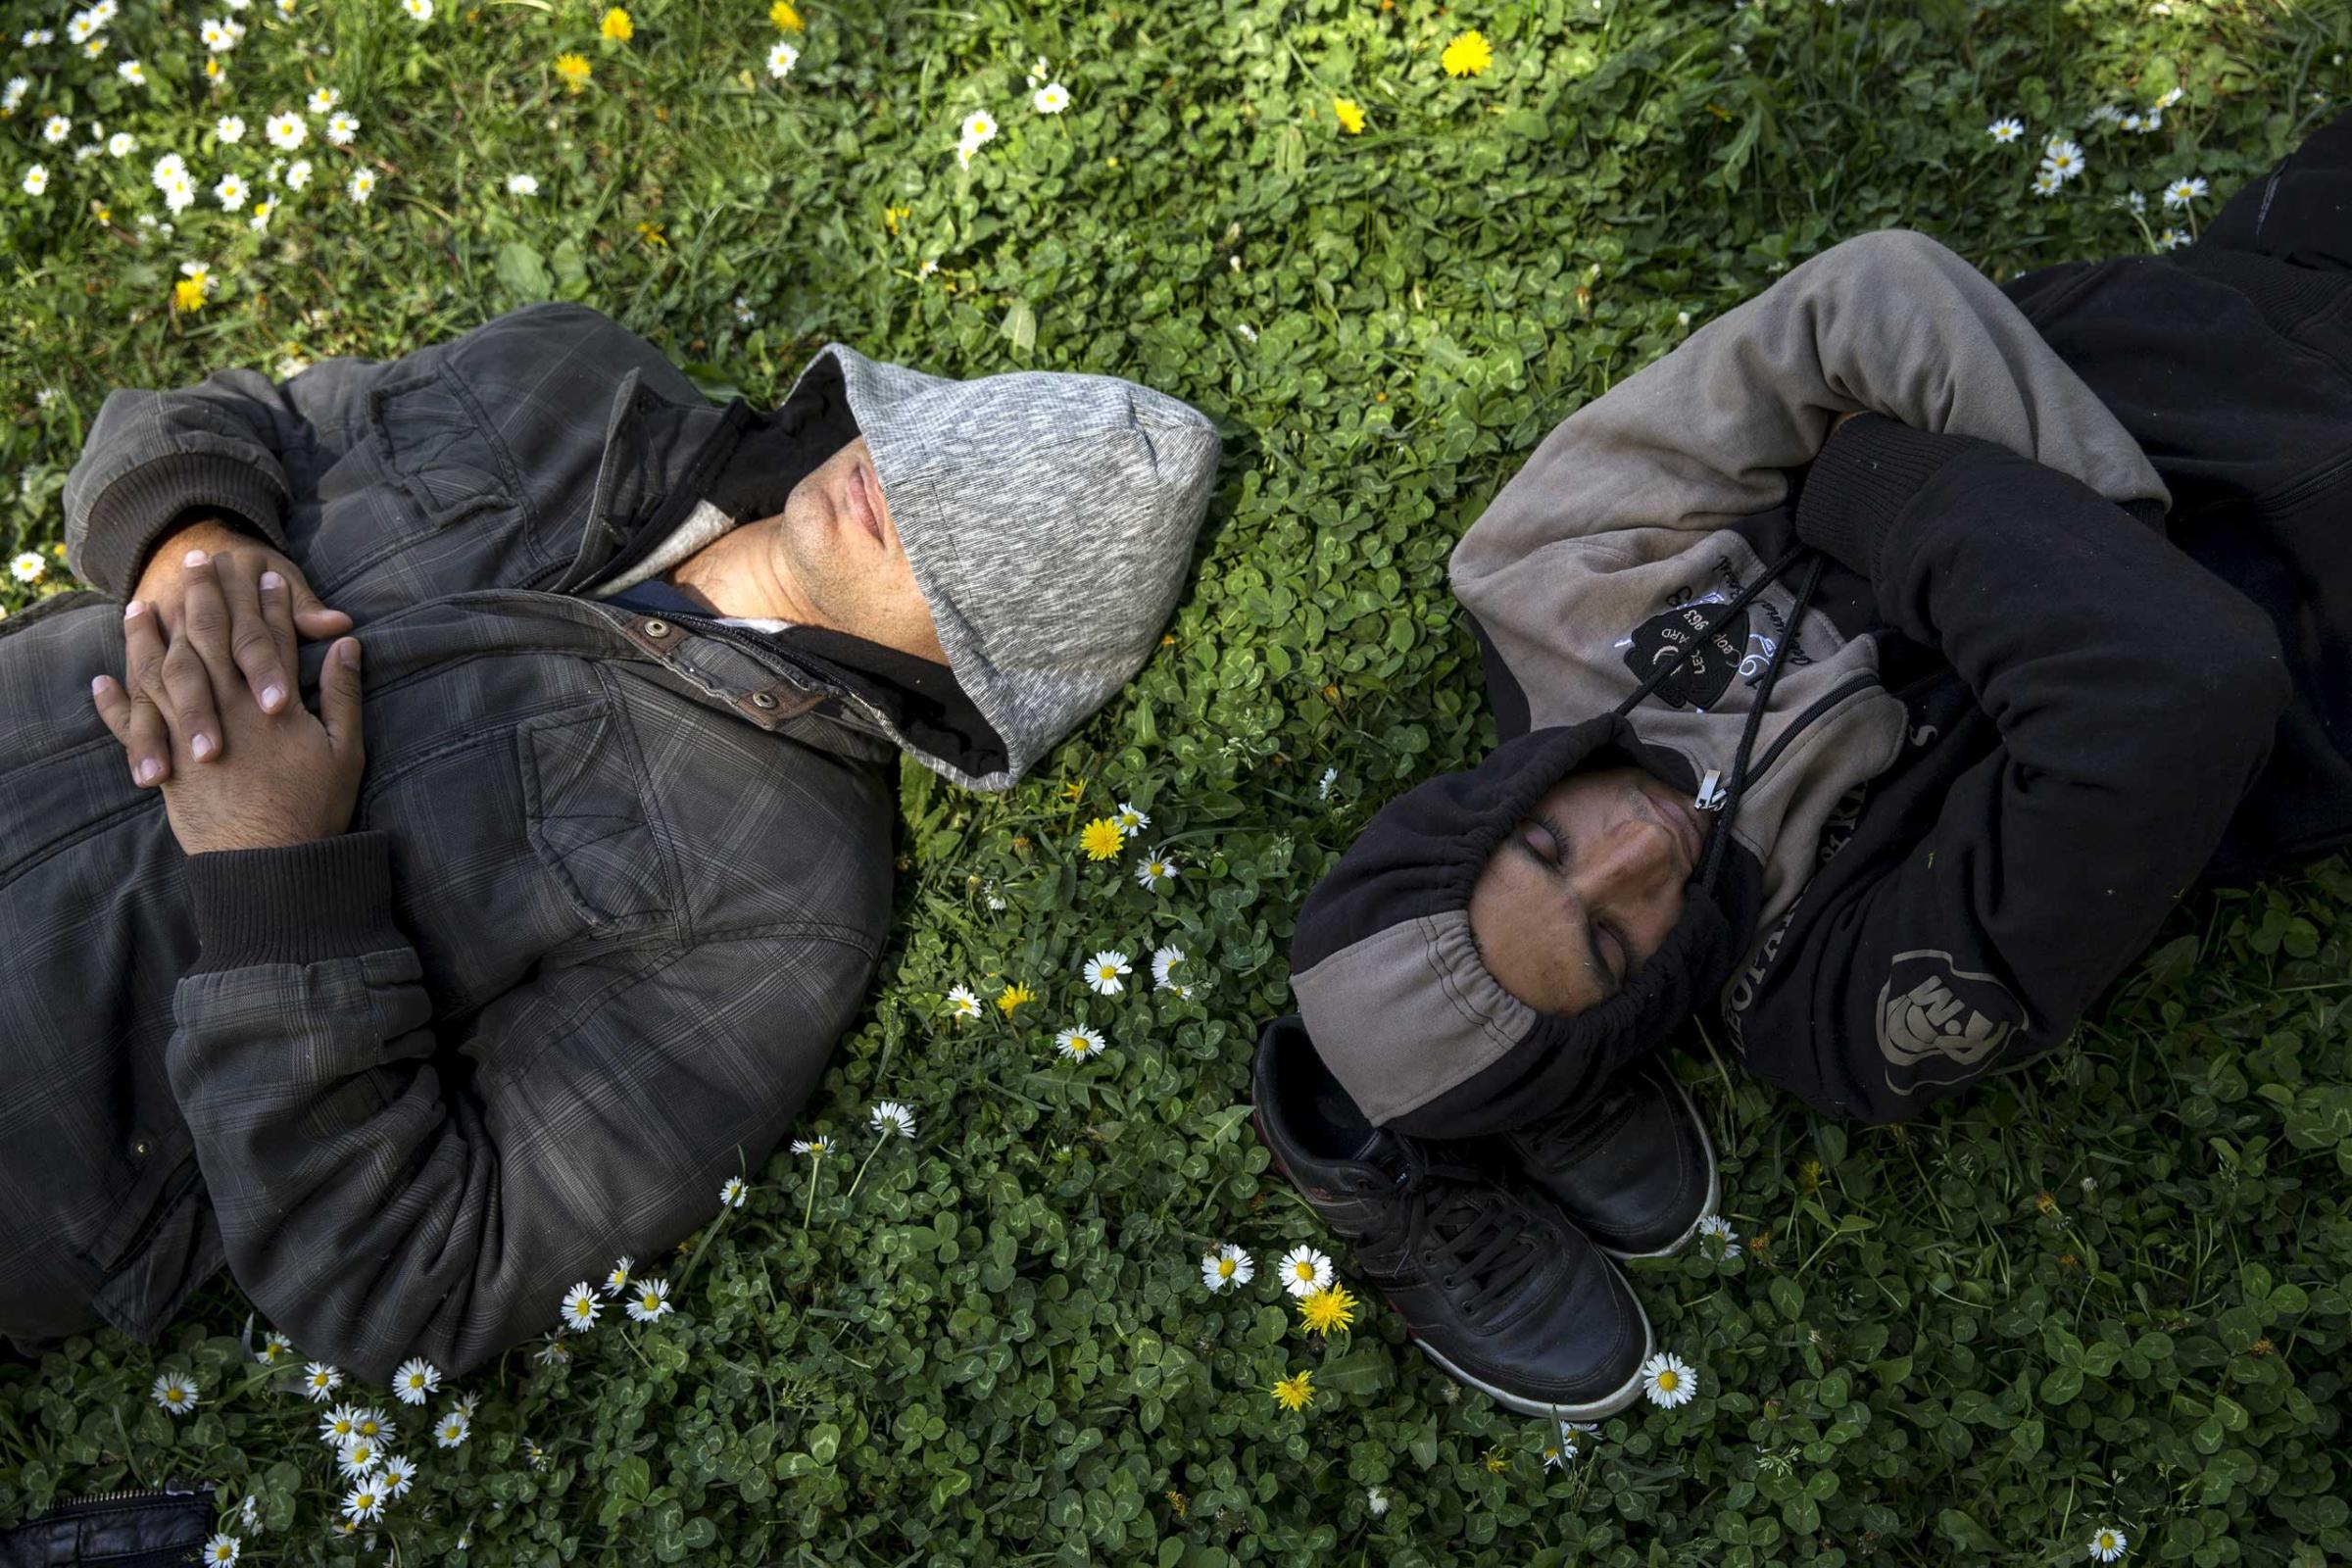 Migrants sleep in a park near the main Belgrade's bus and train station, Serbia on April 24, 2015.